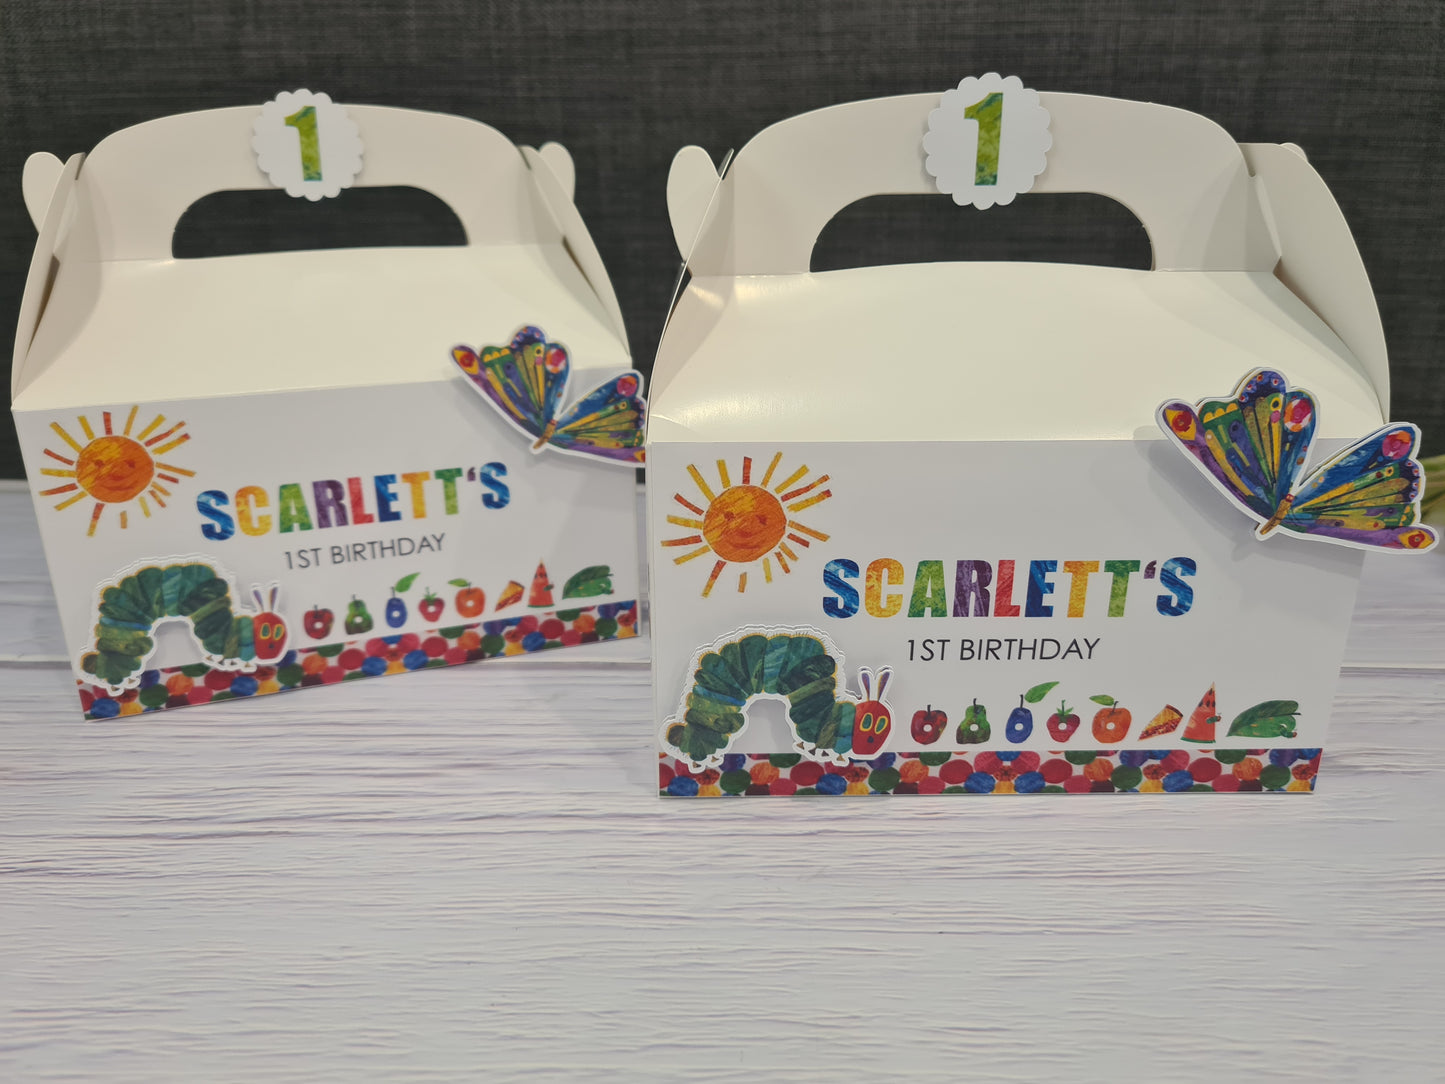 Hungry Caterpillar Party Box